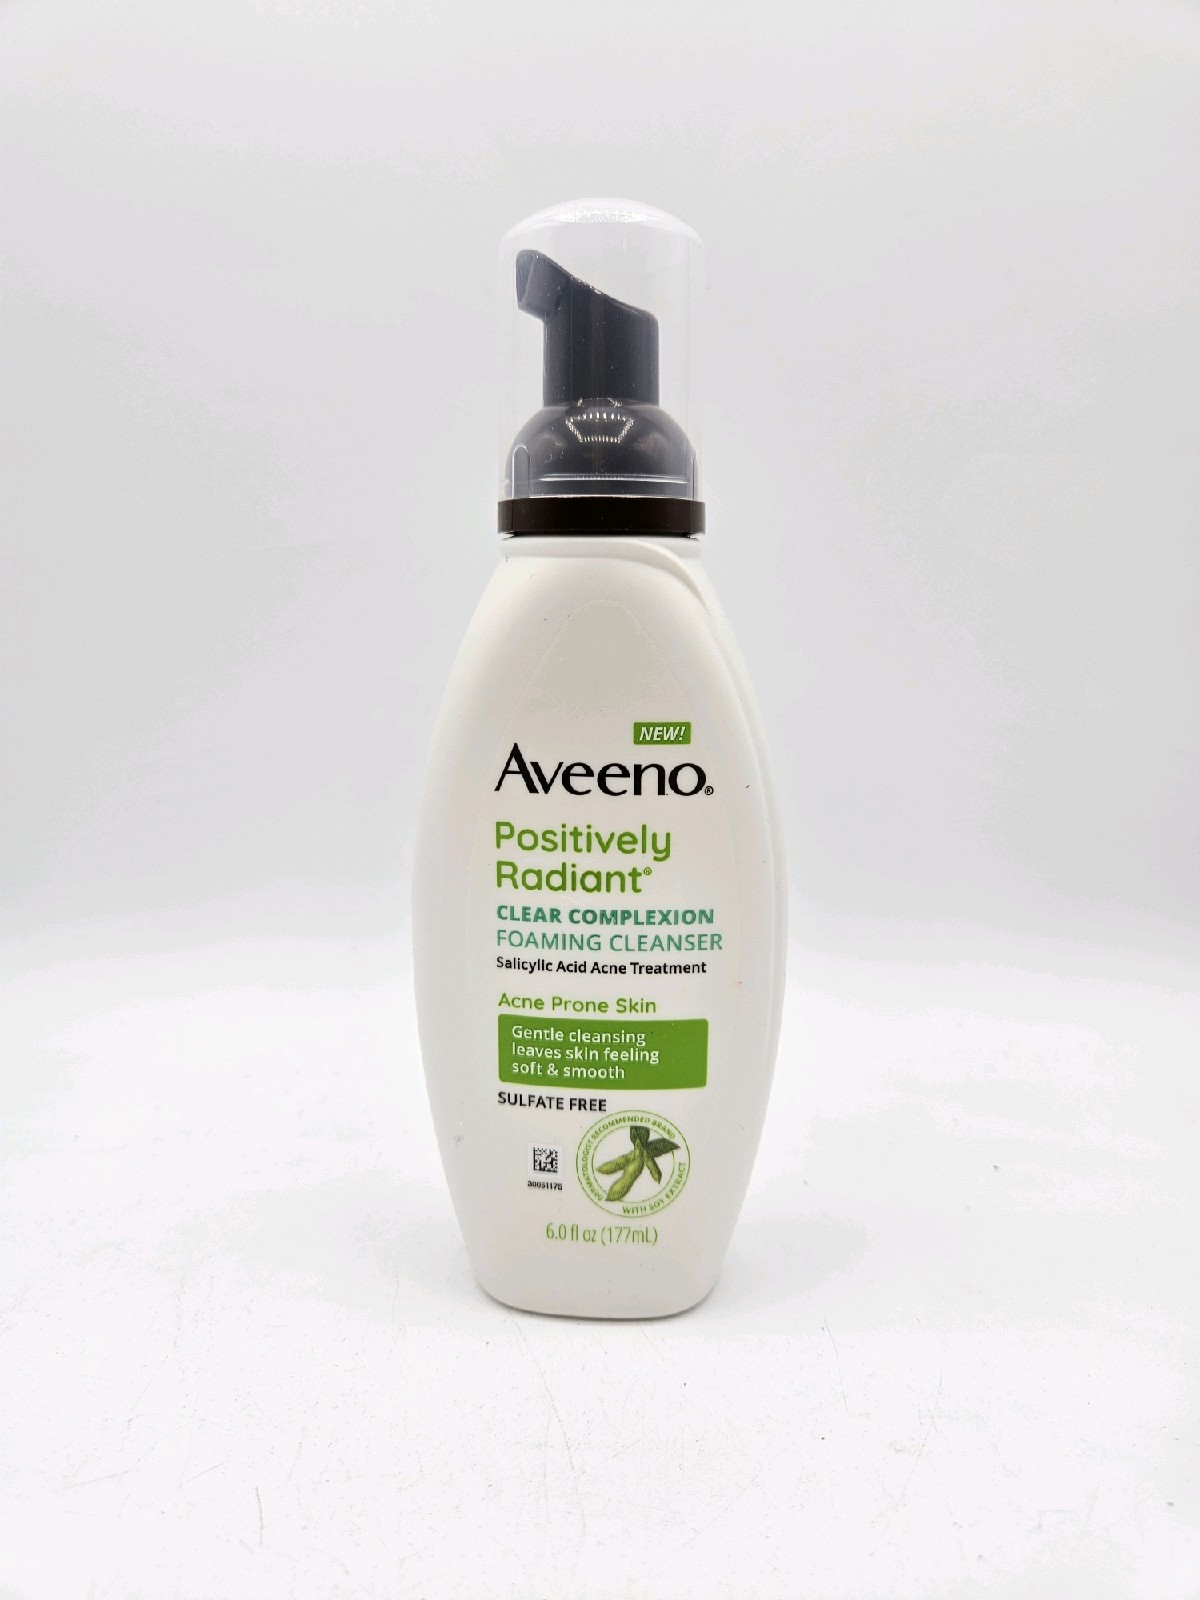 Aveeno Clear Complexion Foaming Facial Cleanser Acne Face Wash 6 Oz